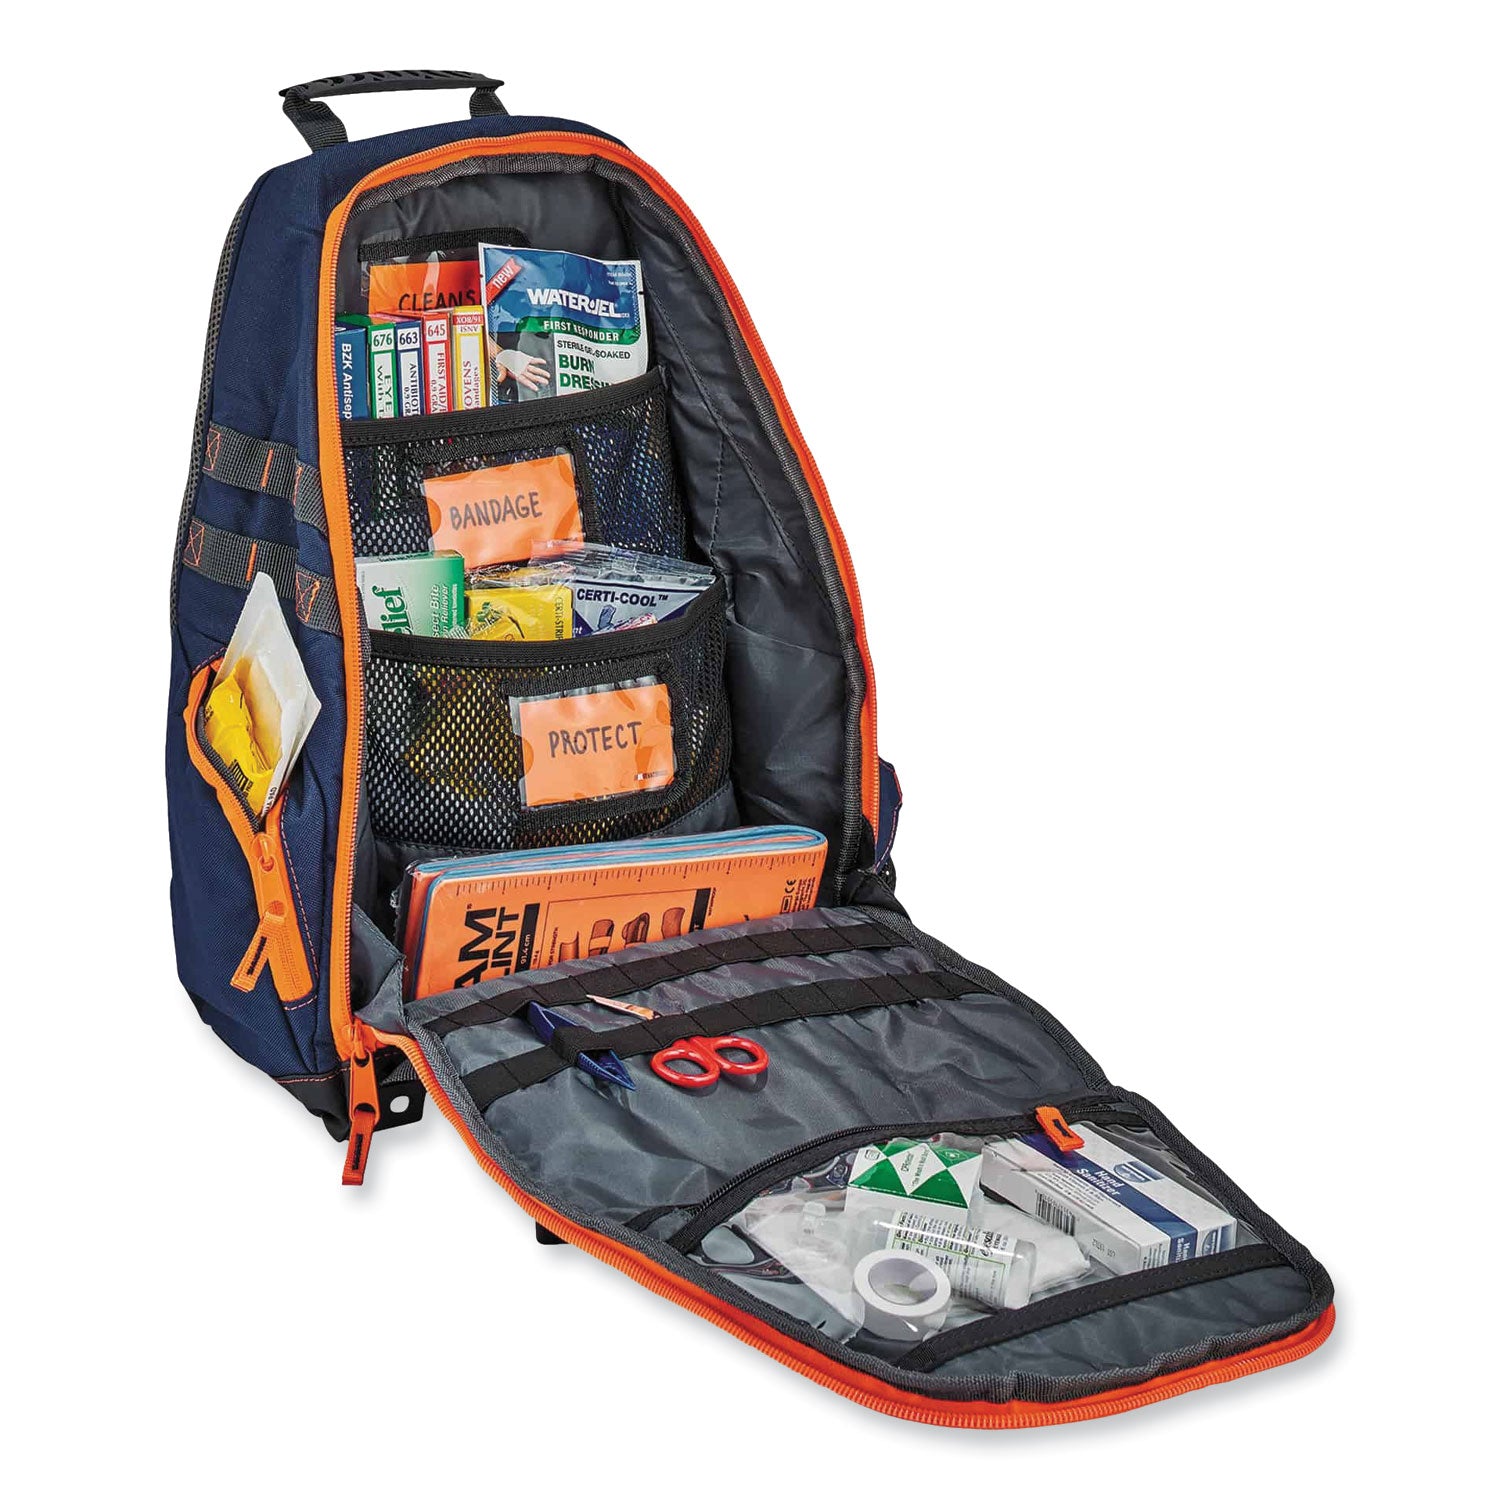 arsenal-5244-responder-backpack-8-x-145-x-20-blue-ships-in-1-3-business-days_ego13497 - 7